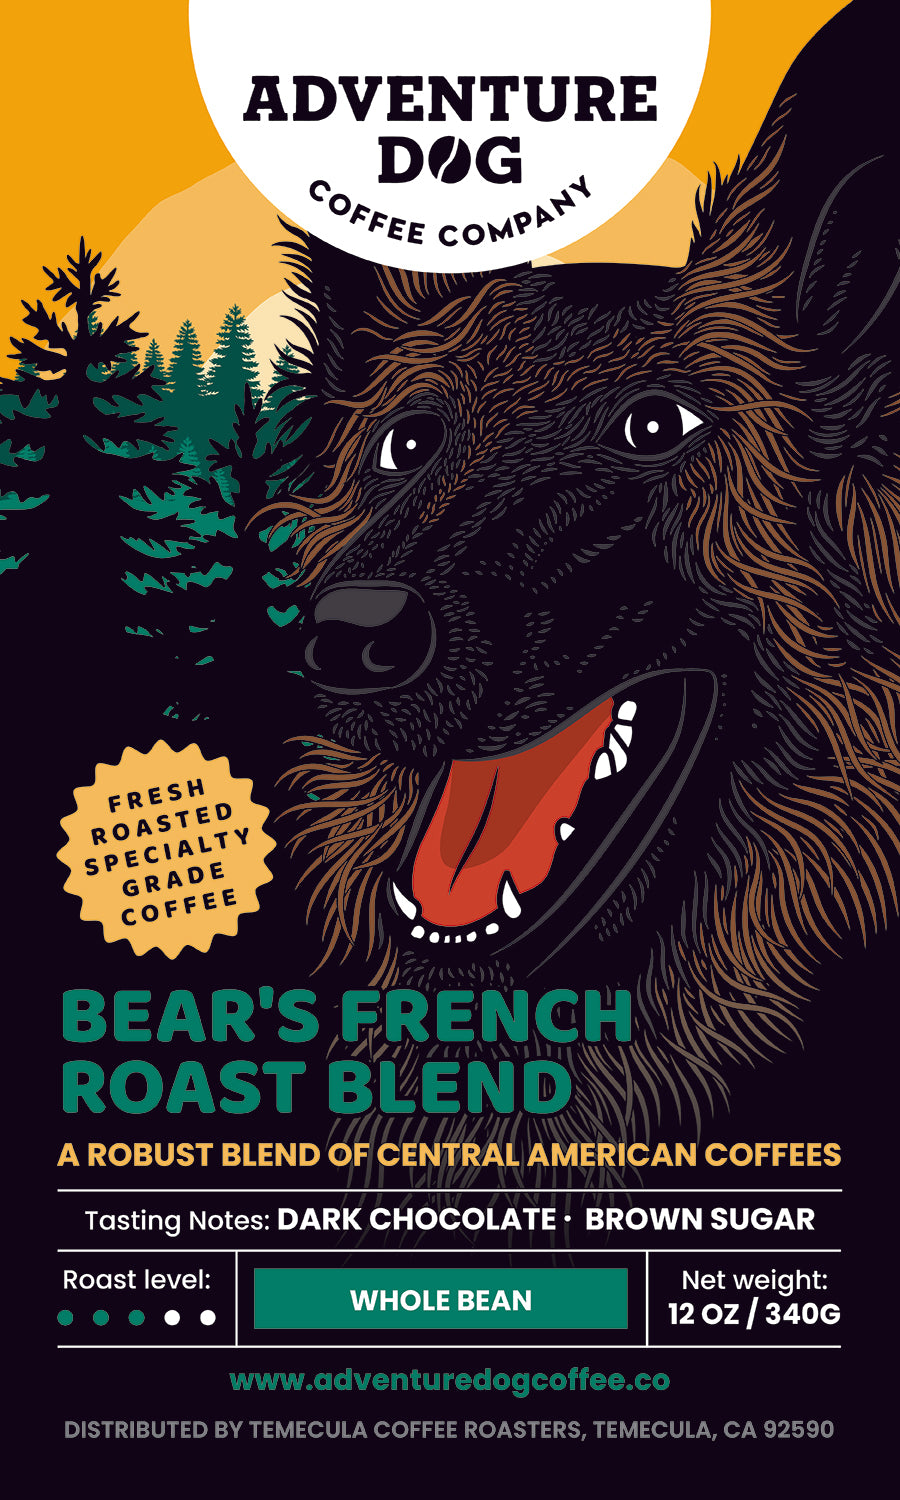 Bear's French Roast is delightfully robust blend of three distinct Latin American specialty grade coffees, perfectly combined to create an inviting dark chocolate and brown sugar flavor profile...promising a coffee experience like no other.